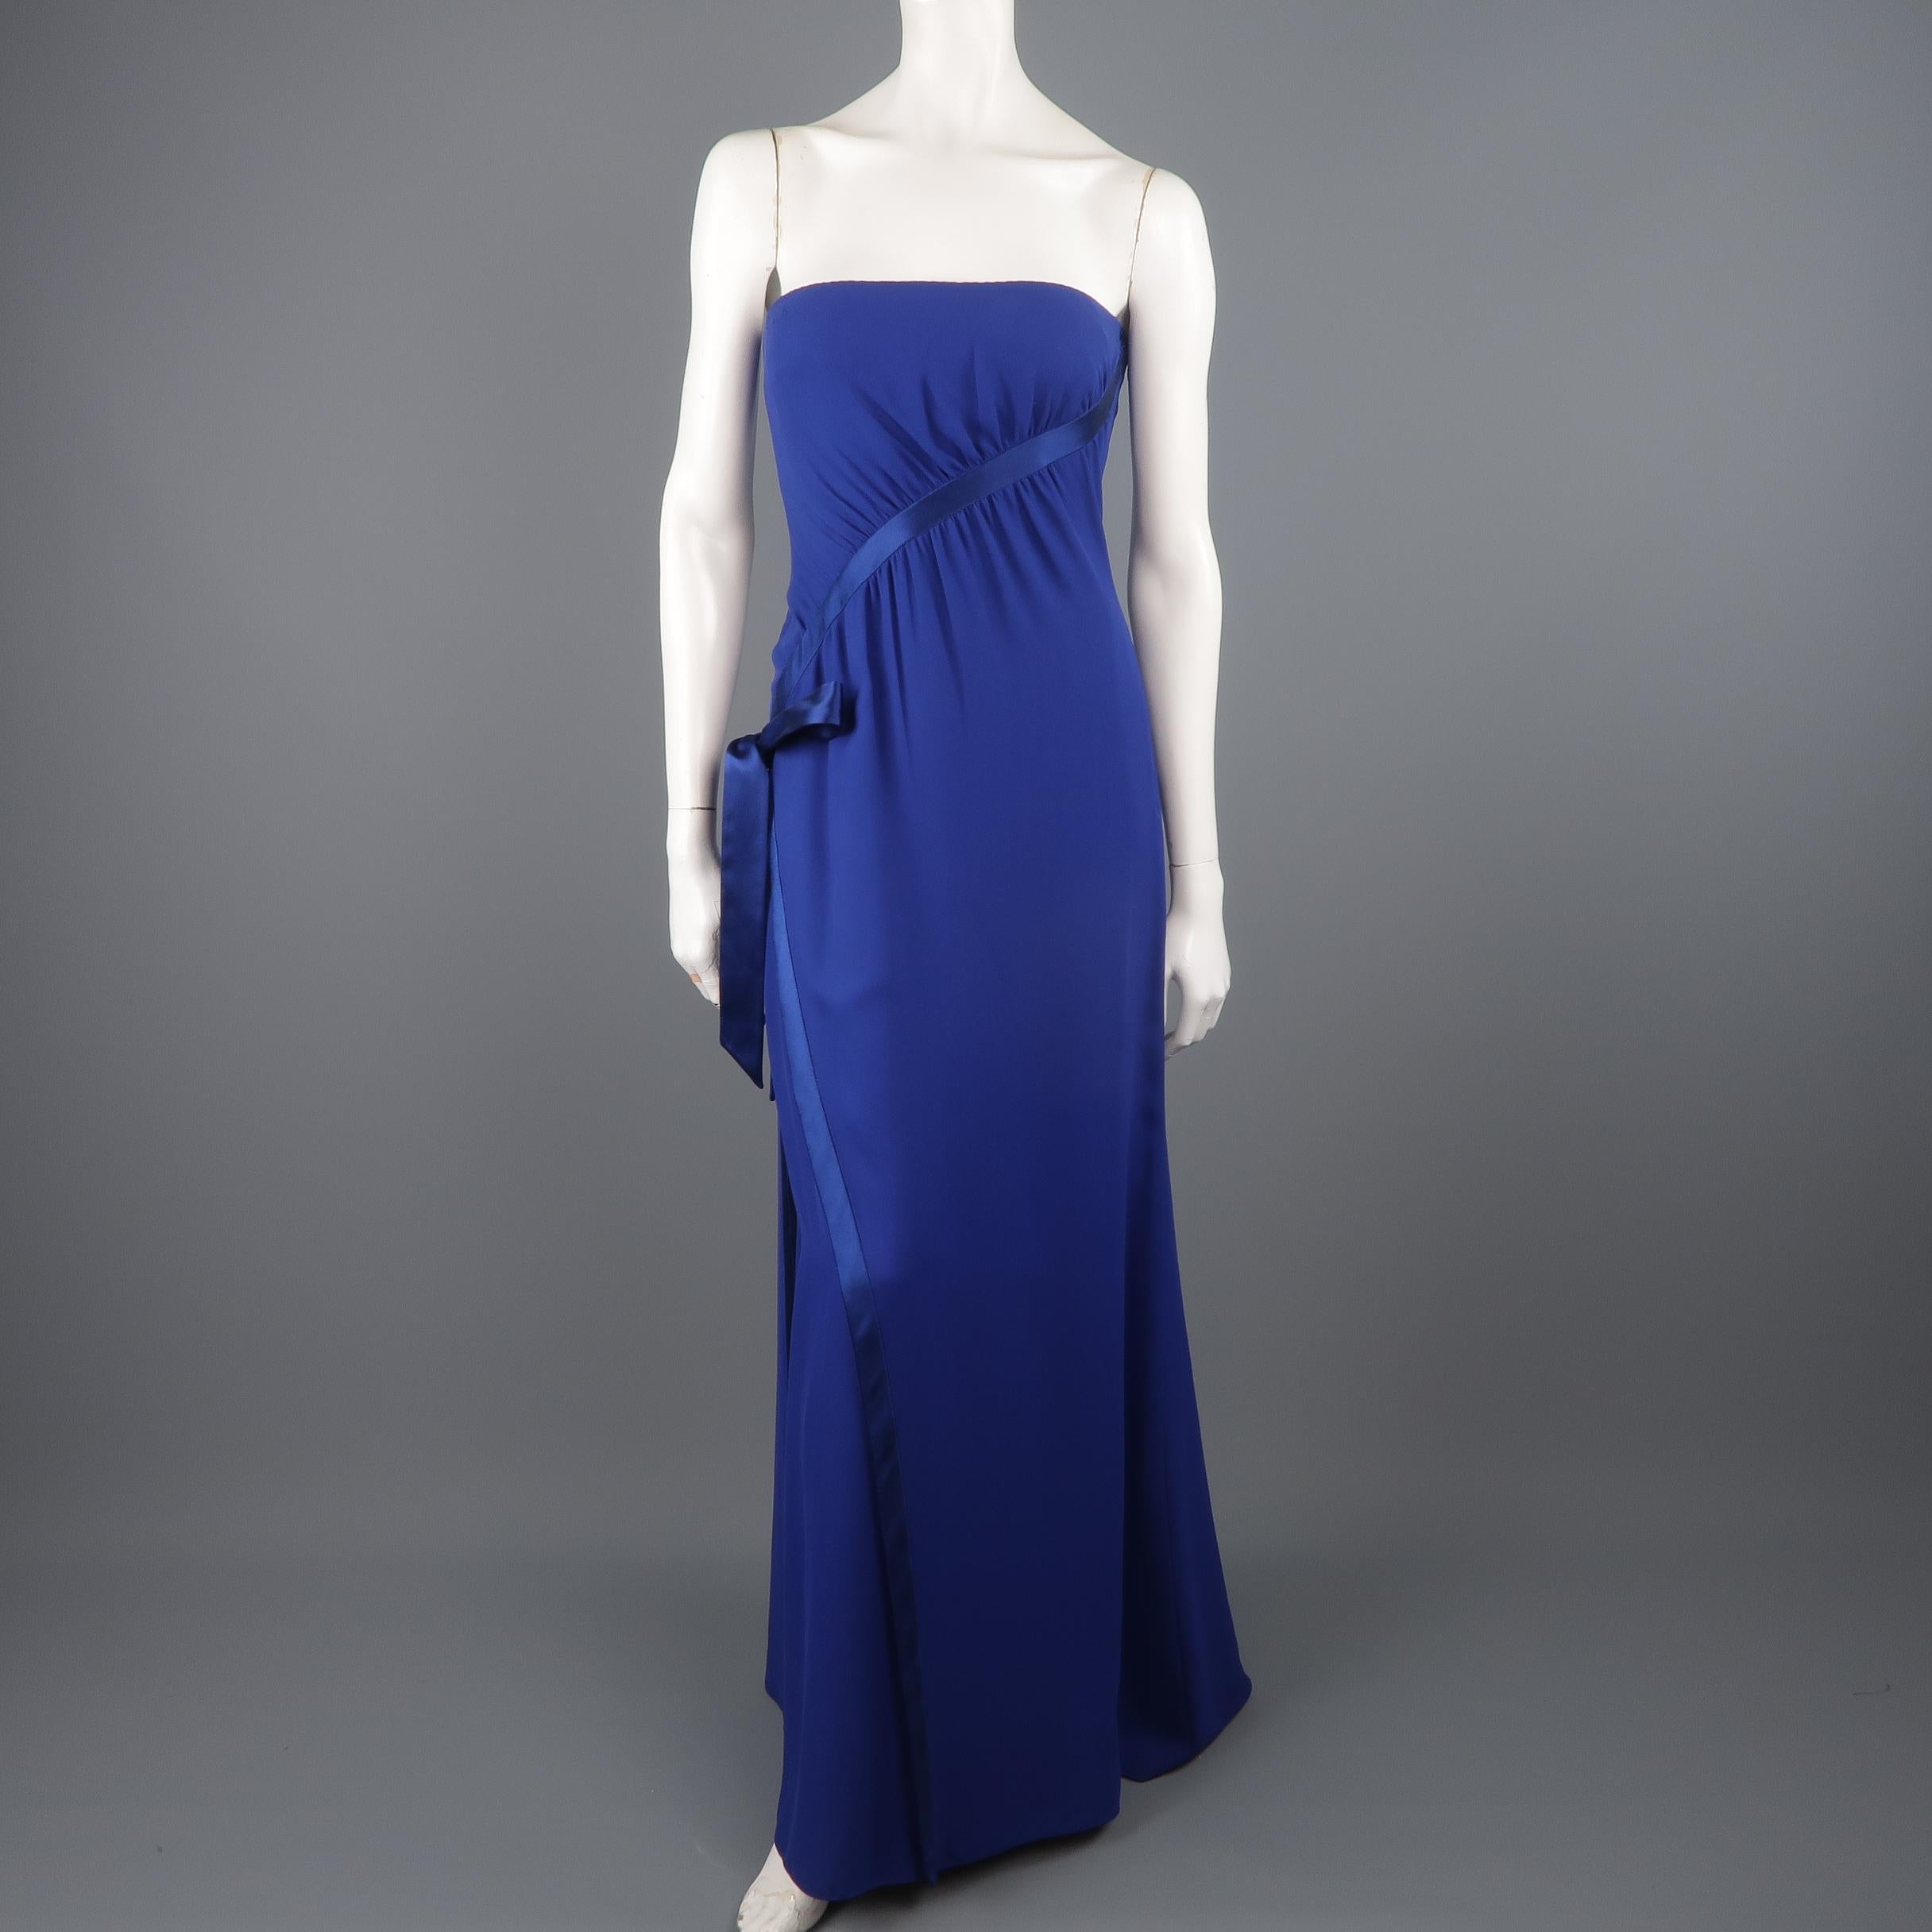 Valentino strapless evening gown comes in royal blue crepe with a built in bustier, slit overlay, and ribbon bow detail with gathering and comes in a draped satin bolero with sequin floral cap sleeves. Wear along neckline from hanger. As is.
 
Fair